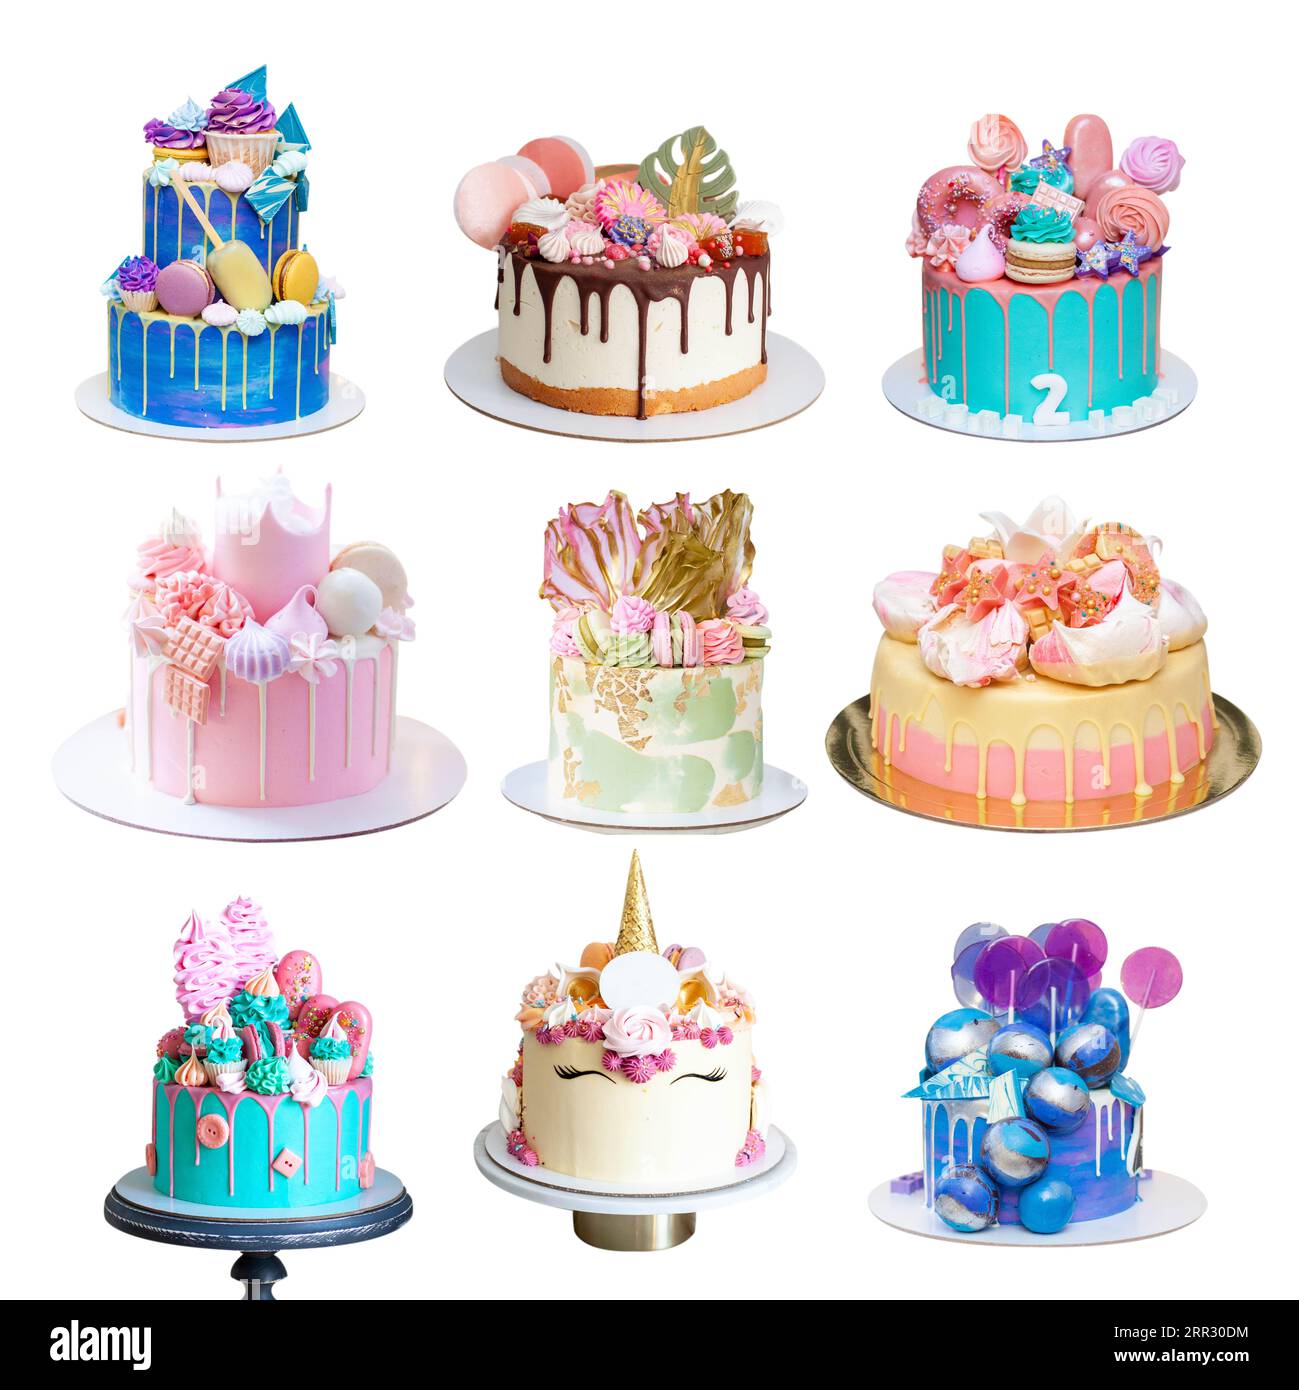 Set of different delicious cakes isolated on white, png. Cakes with unicorn, fondant crown, brownie, chocolate balls. Pink, green, blue cakes Stock Photo